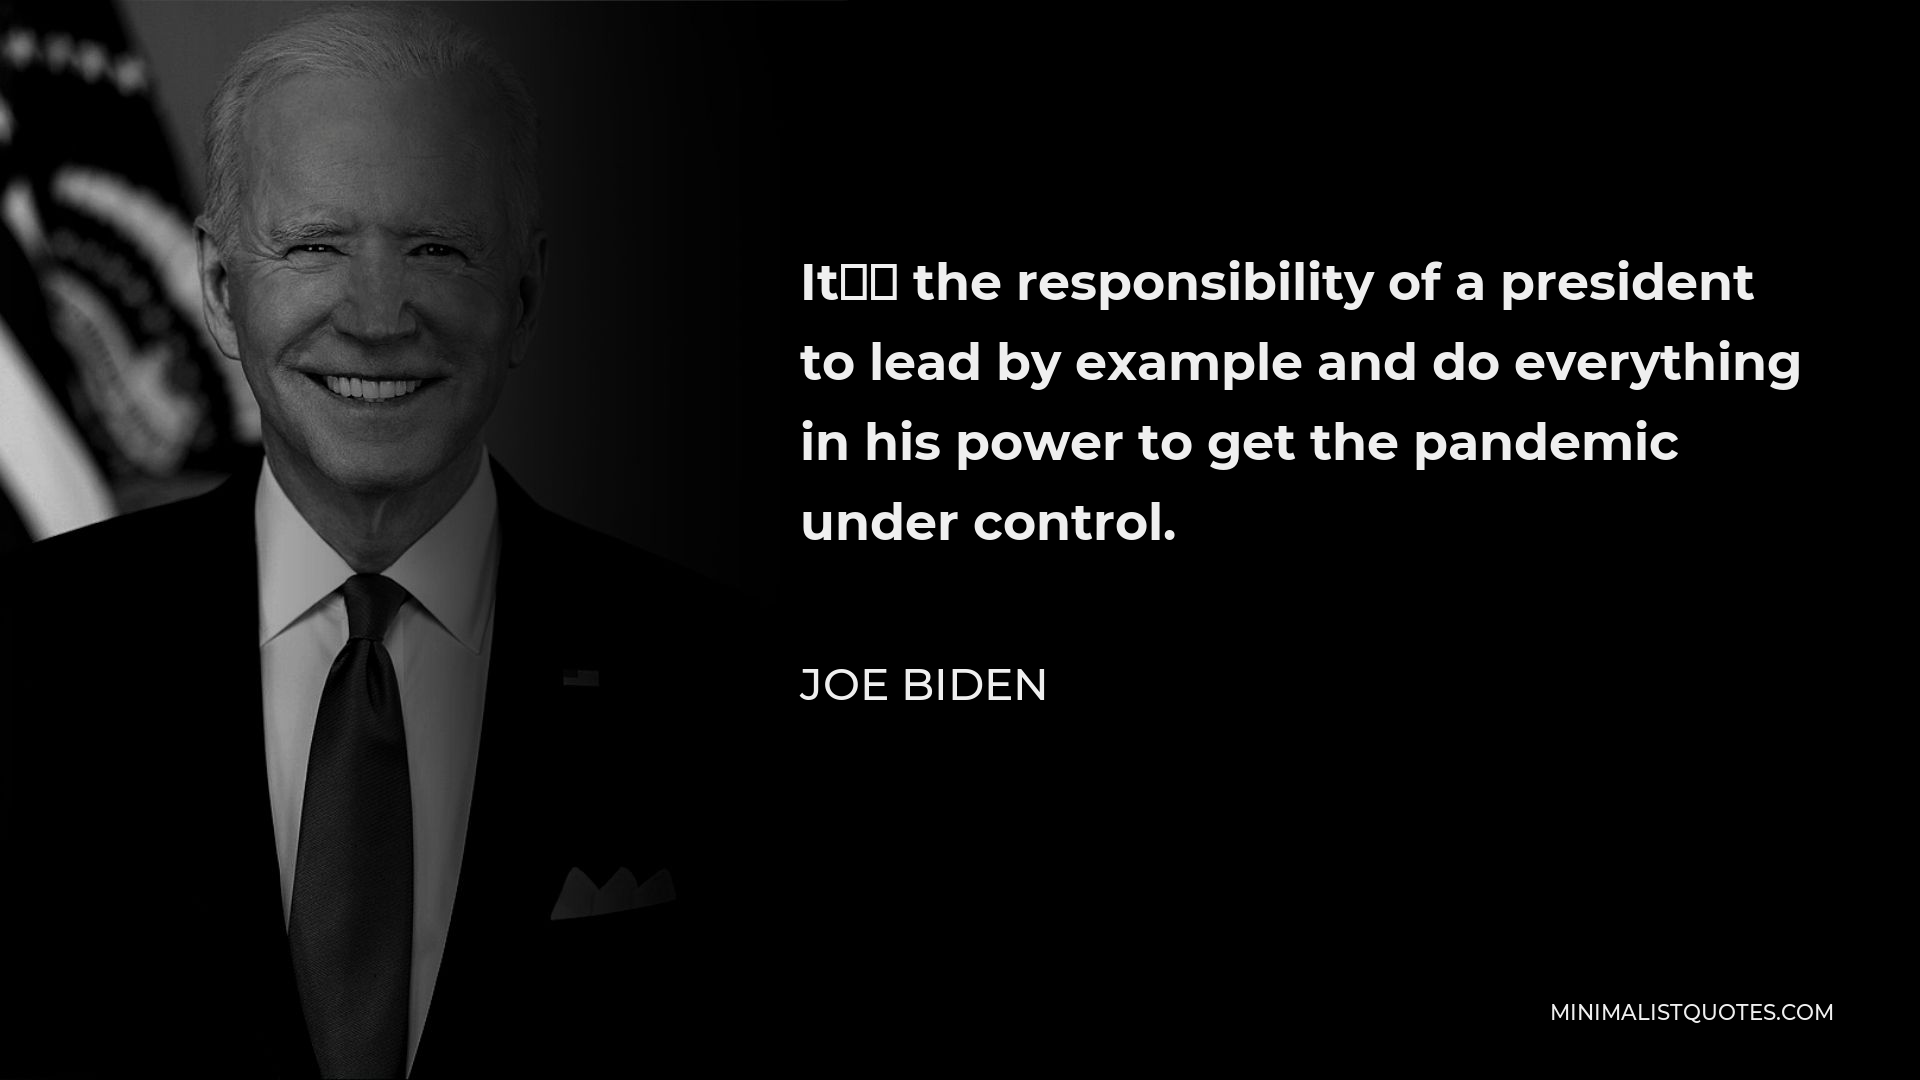 Joe Biden Quote - It’s the responsibility of a president to lead by example and do everything in his power to get the pandemic under control.